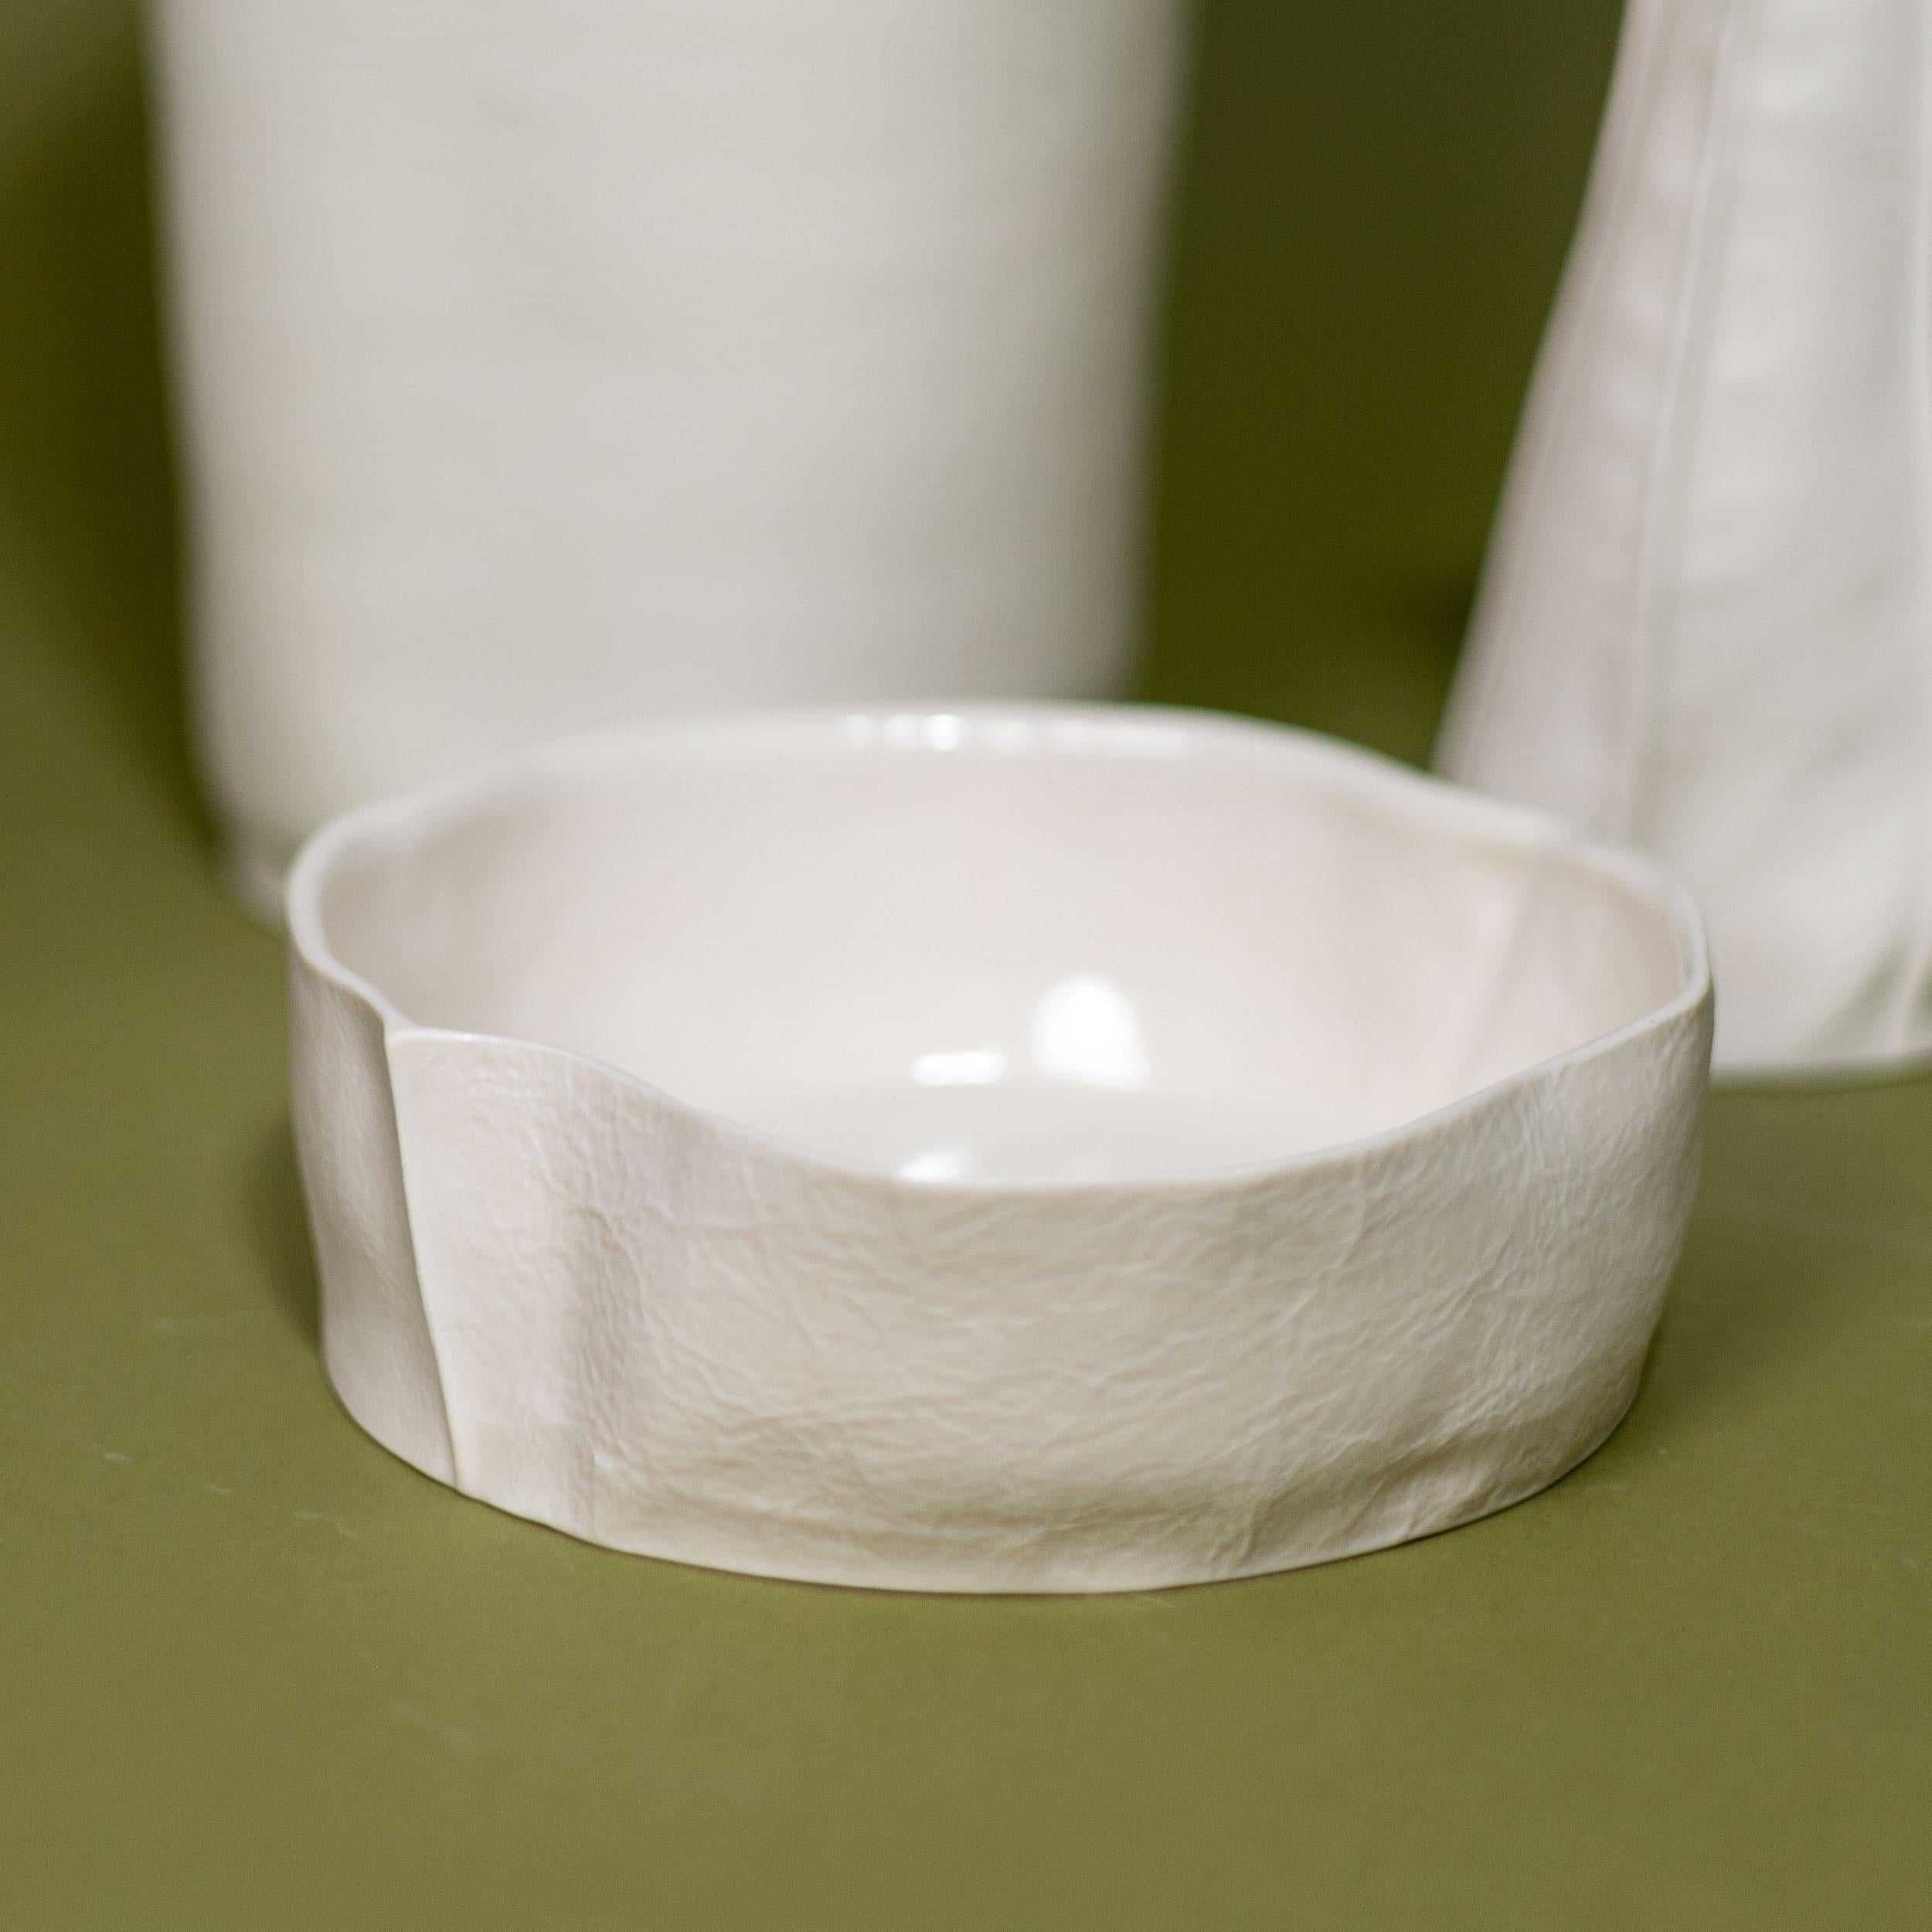 Hand-Crafted In-Stock, Set of 3 White Ceramic Vases & Dish, Luft Tanaka, Porcelain, Organic For Sale